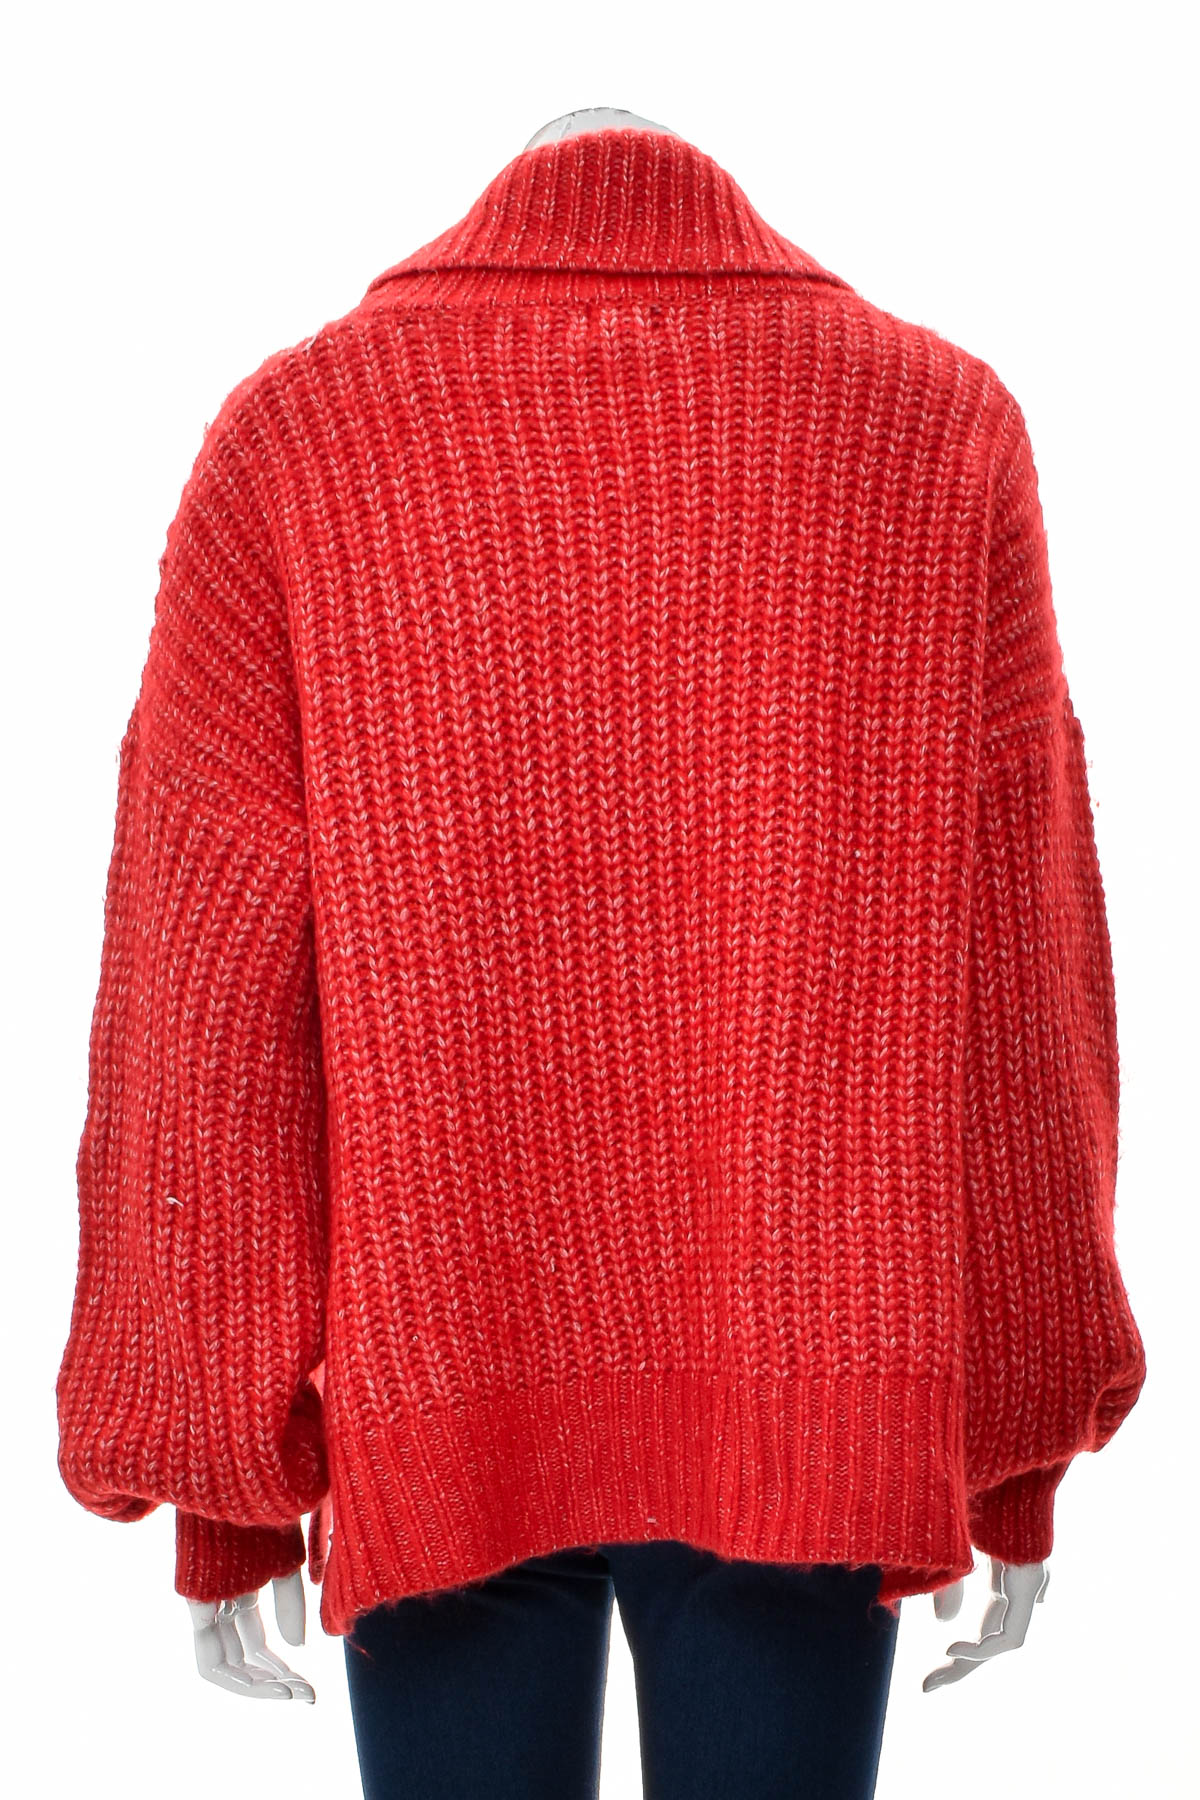 Women's sweater - A.new.day - 1